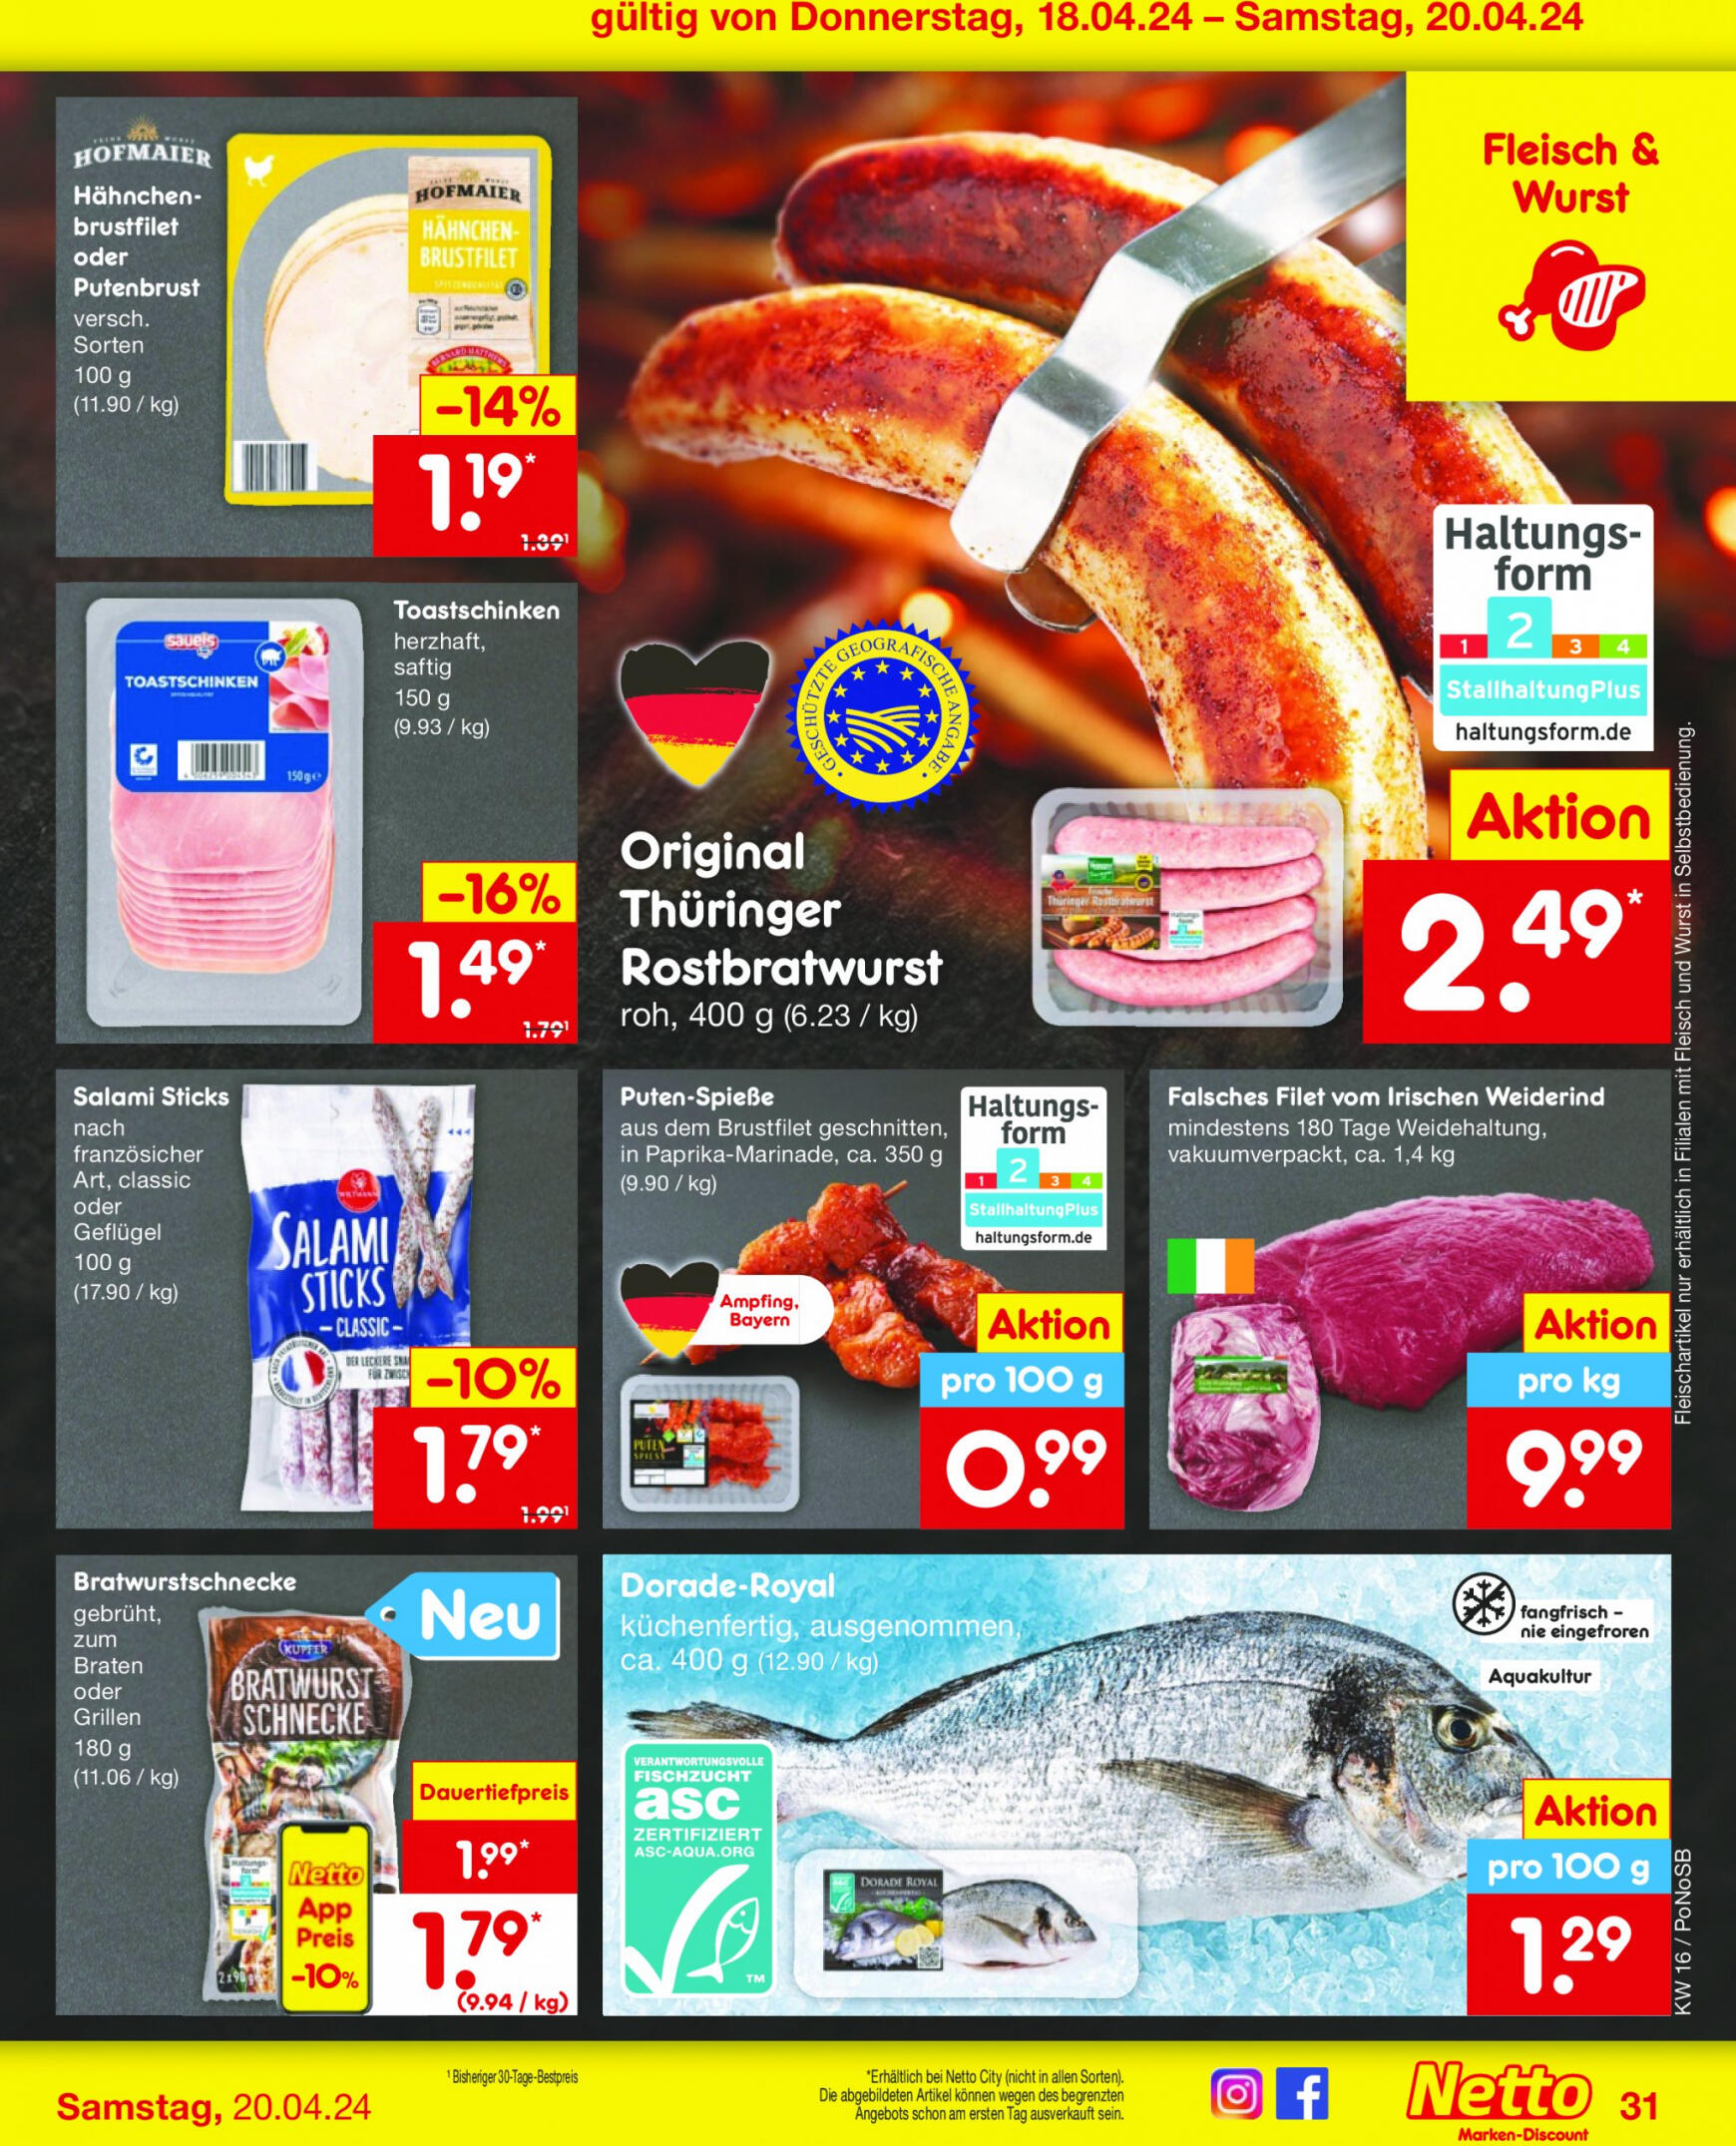 netto - Flyer Netto aktuell 15.04. - 20.04. - page: 37